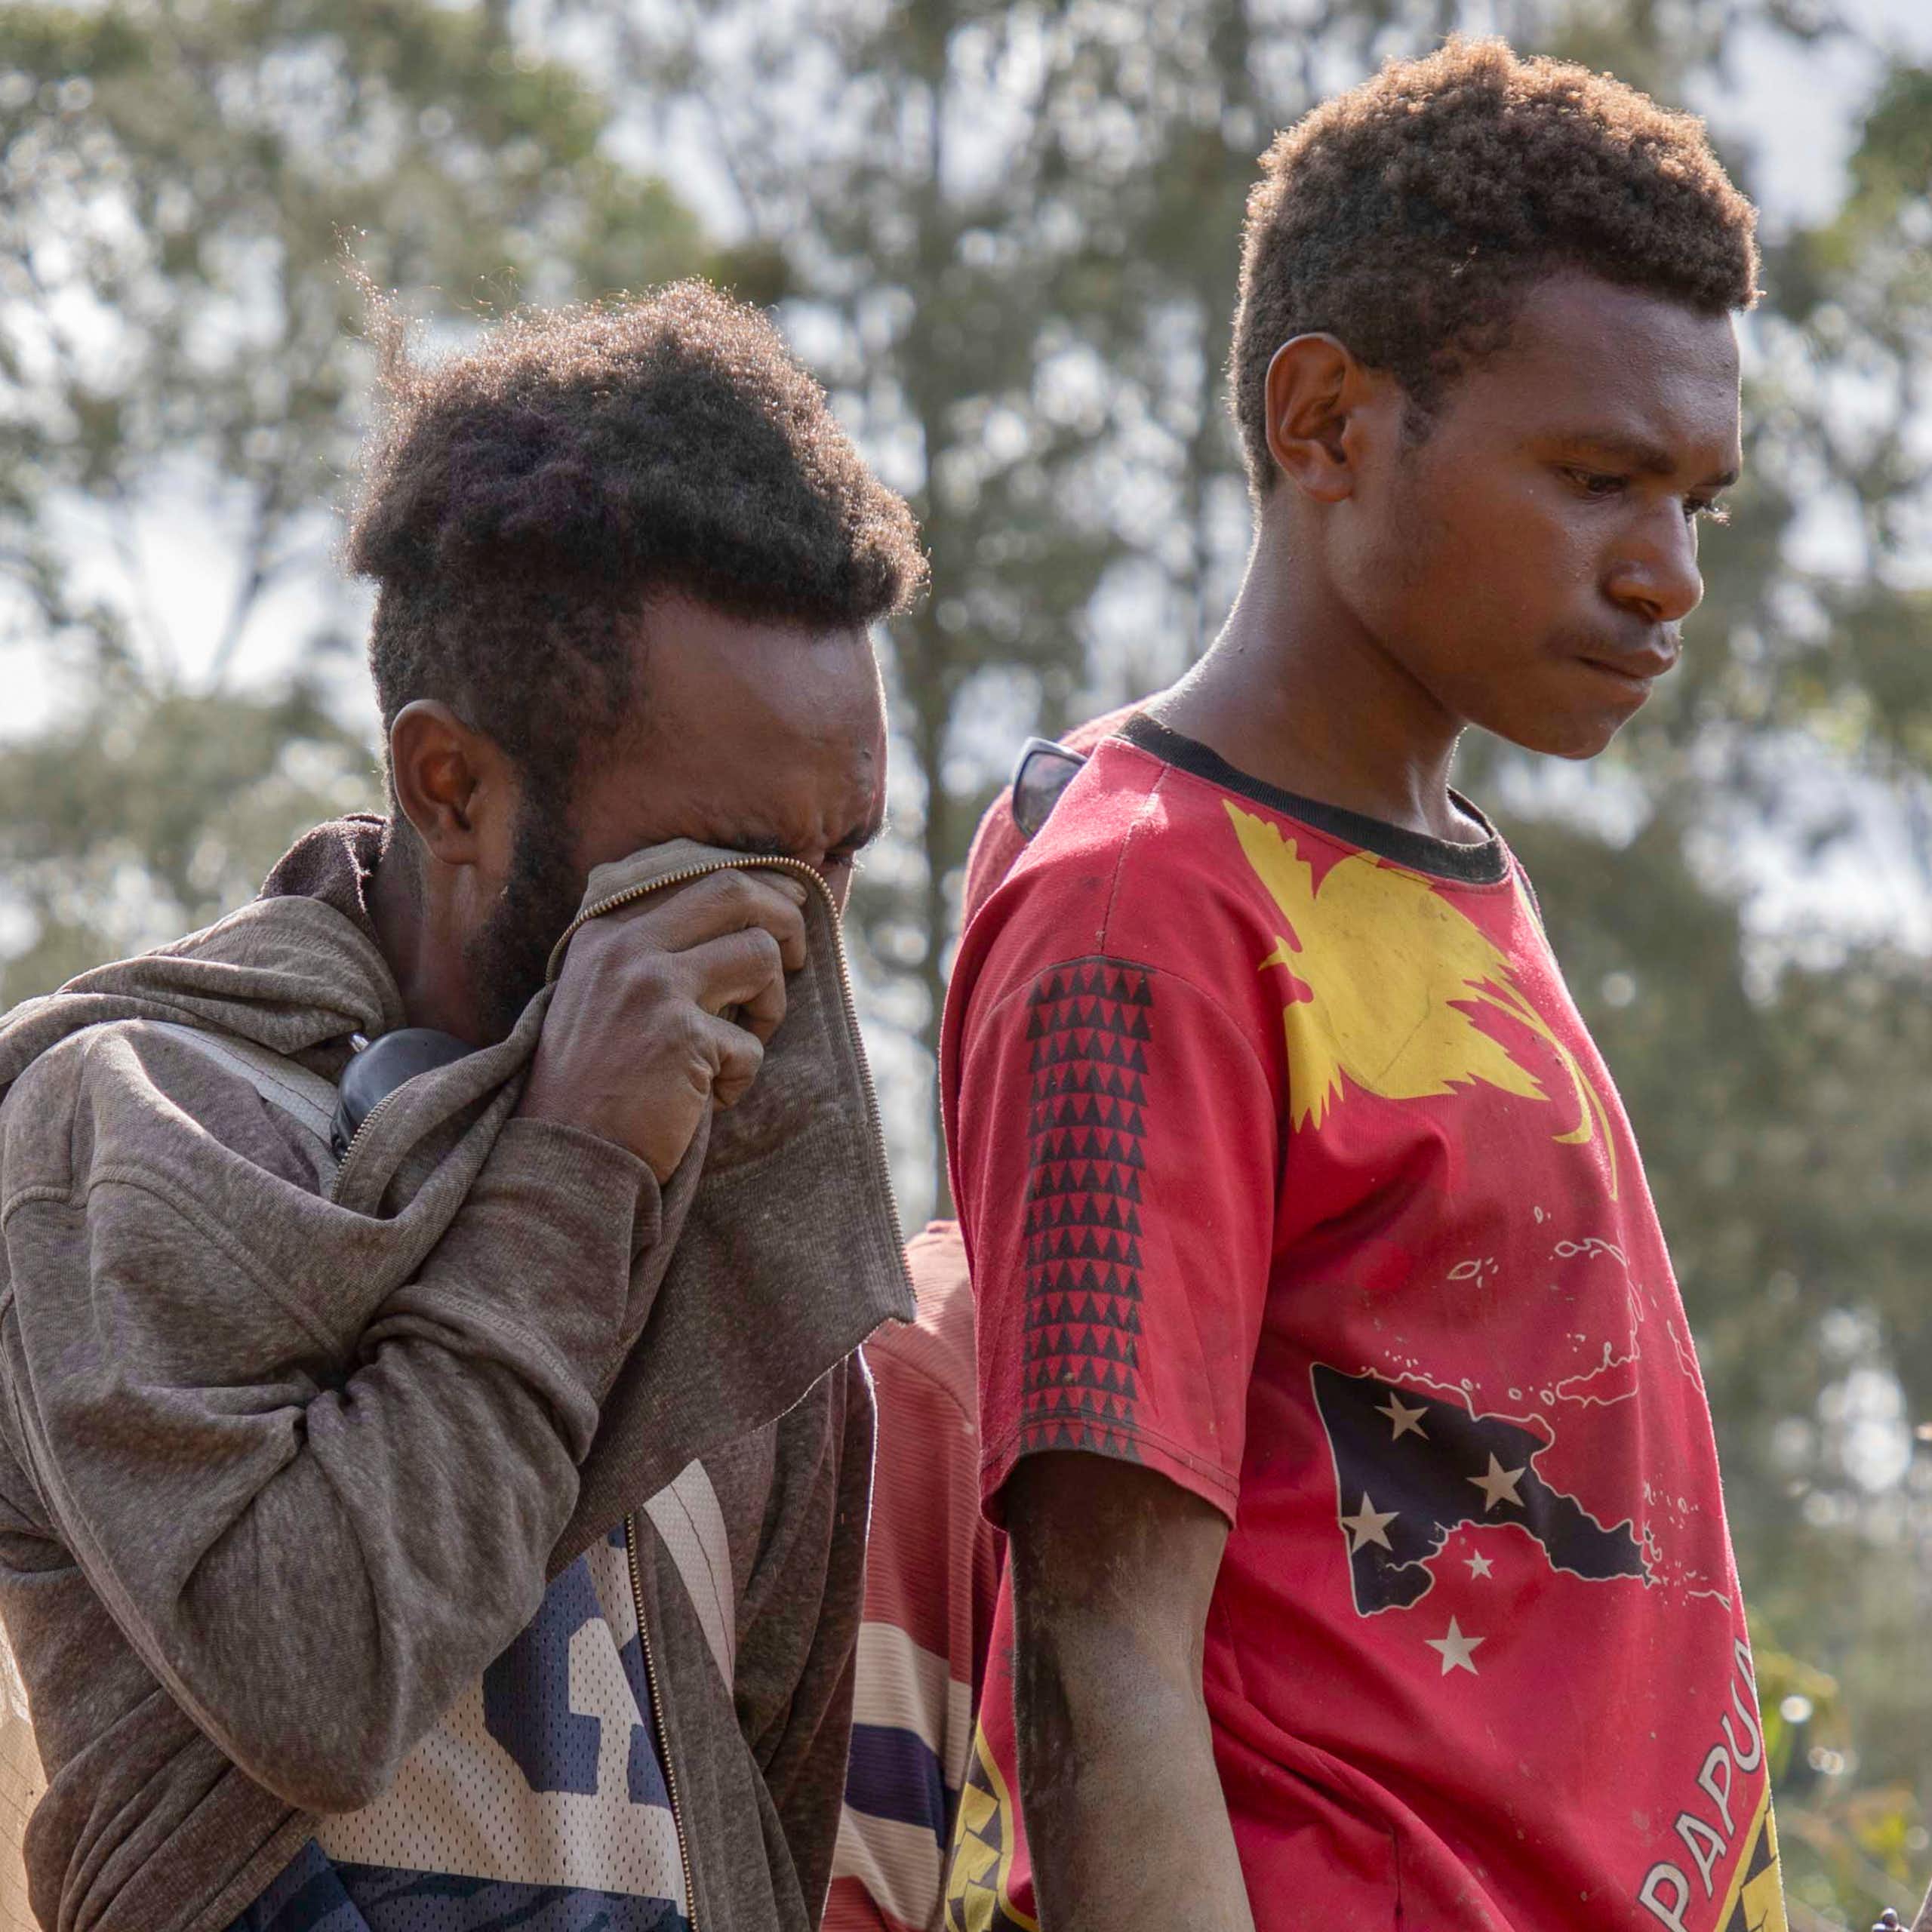 From injuries to infectious diseases, what are the health risks in the aftermath of PNG’s landslide?